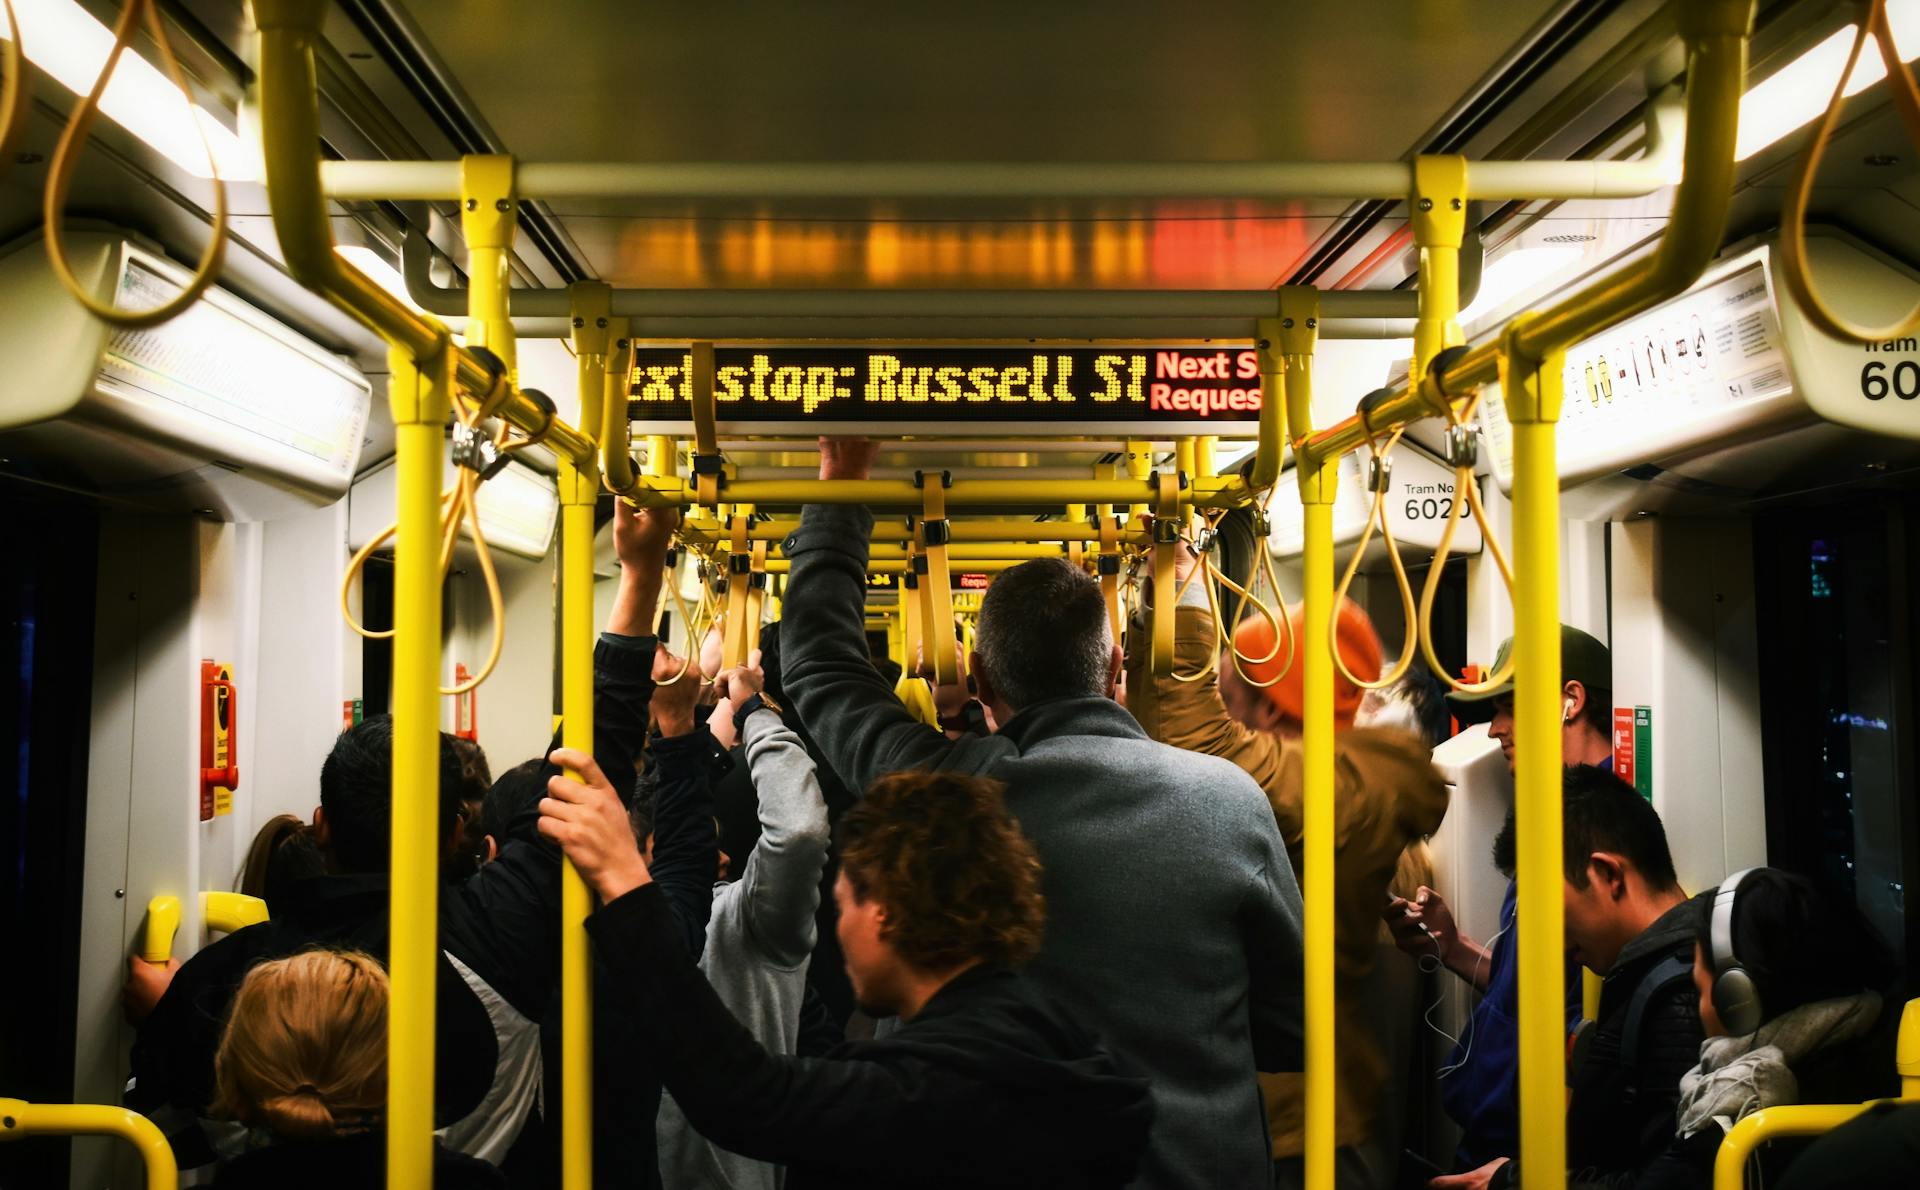 A train crowded with passengers | Source: Pexels